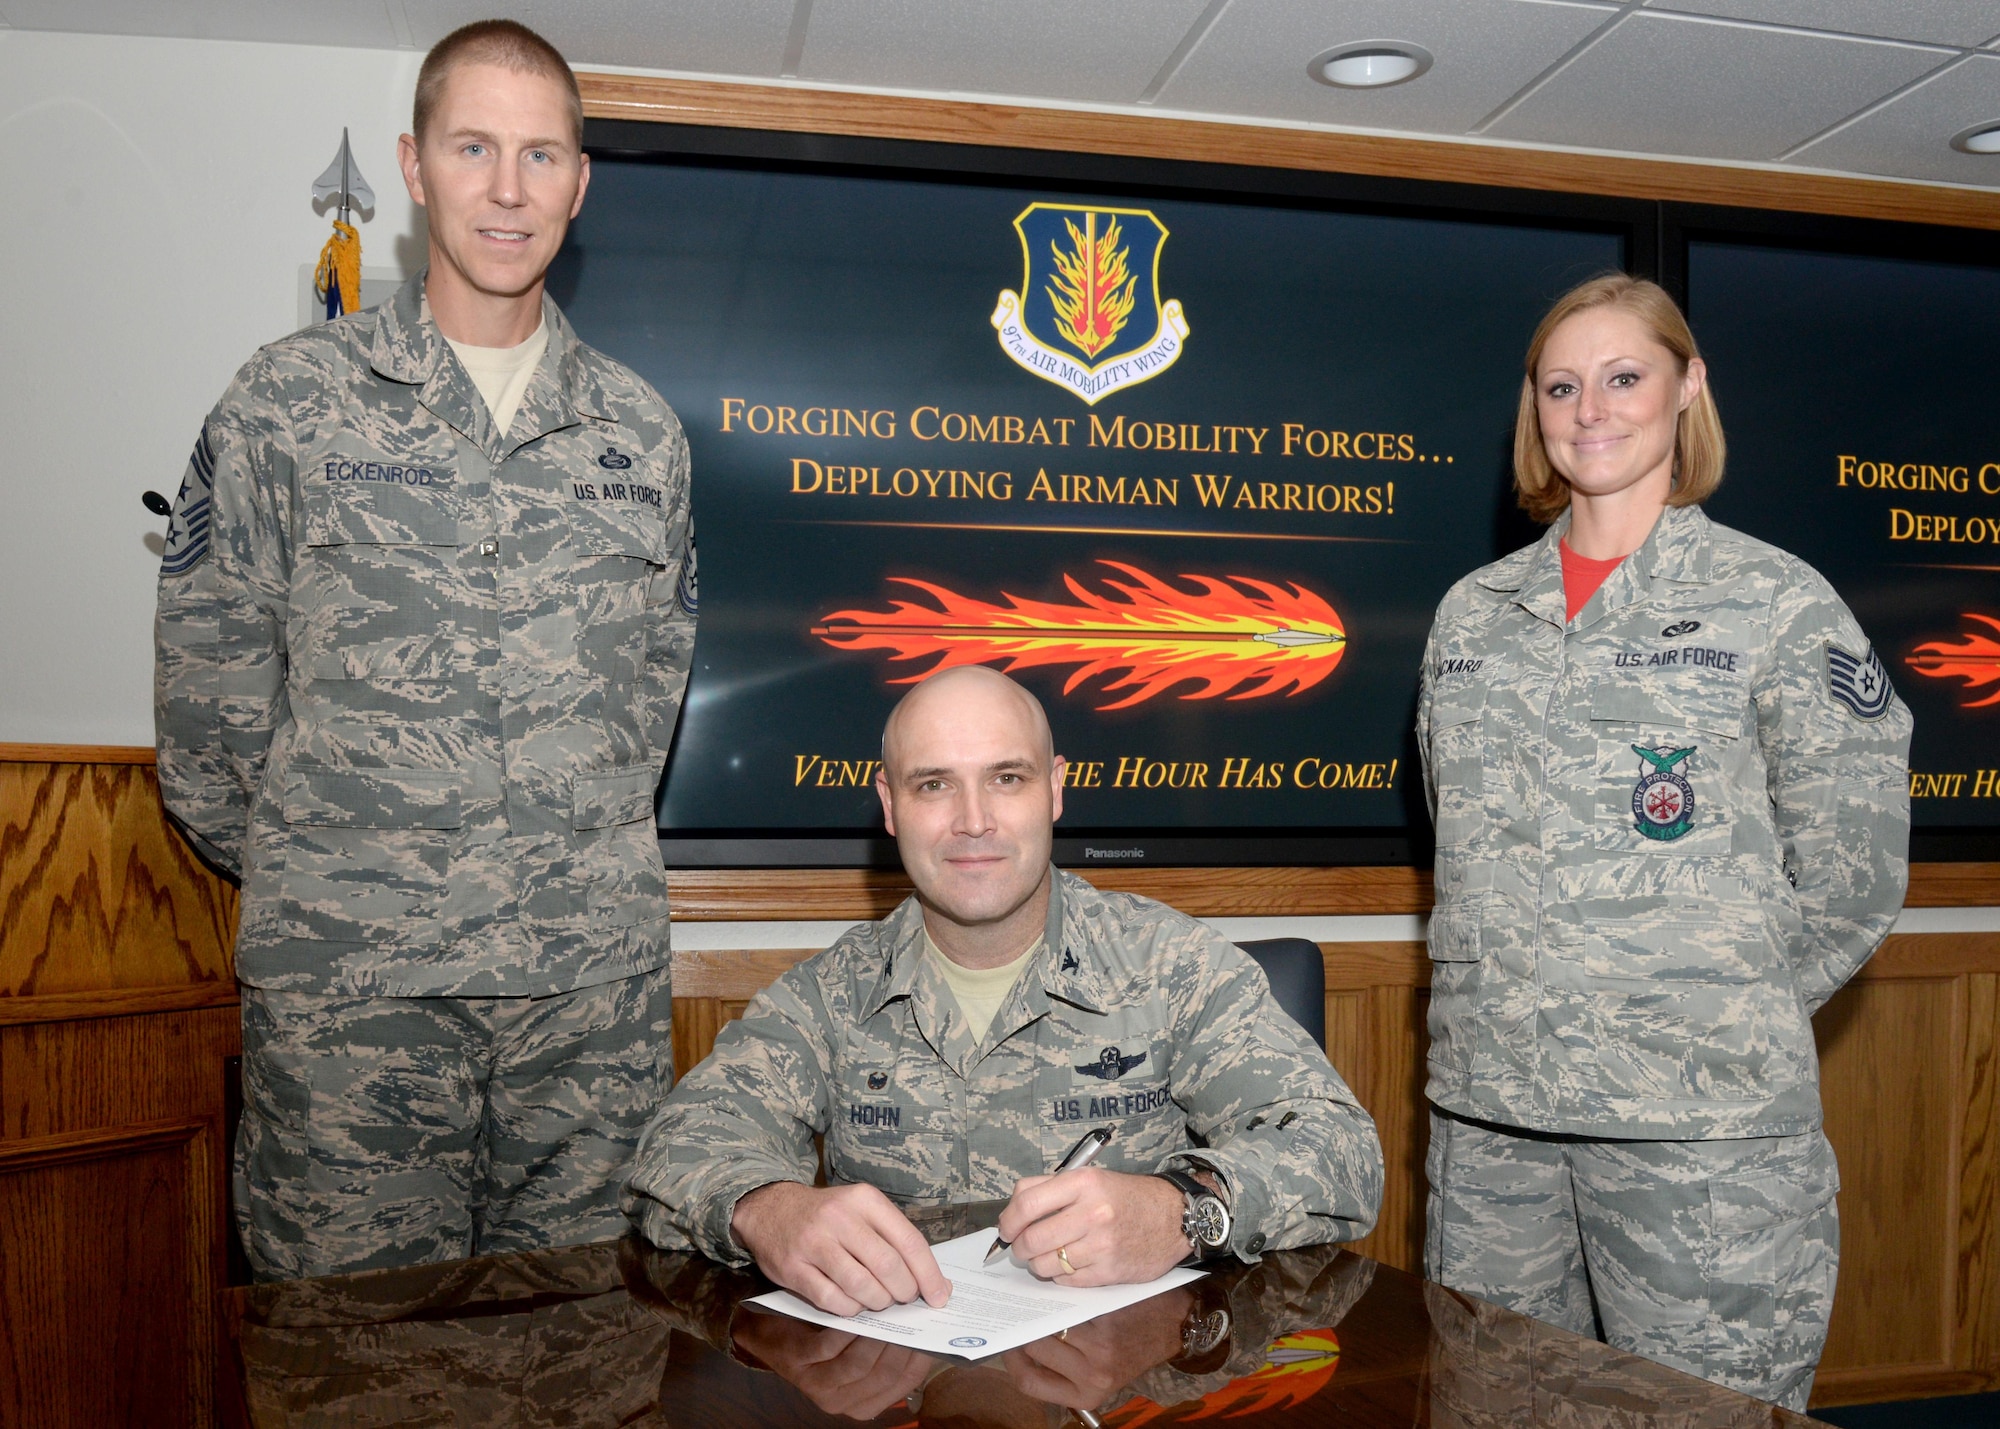 U.S. Air Force Col. Todd Hohn, 97th Air Mobility Wing commander, Chief Master Sgt. Philip Eckenrod, 97th AMW command chief, and Tech. Sgt. Jessica Packard, Altus AFB Fire Department deputy fire chief, attend the signing of the proclamation for National Disability Employment Awareness Month, Sept. 30, 2016, at Altus Air Force Base, Okla. The proclamation signifies the bases participation during NDEAM. (U.S. Air Force Photo by Airman Jackson N. Haddon/Released).